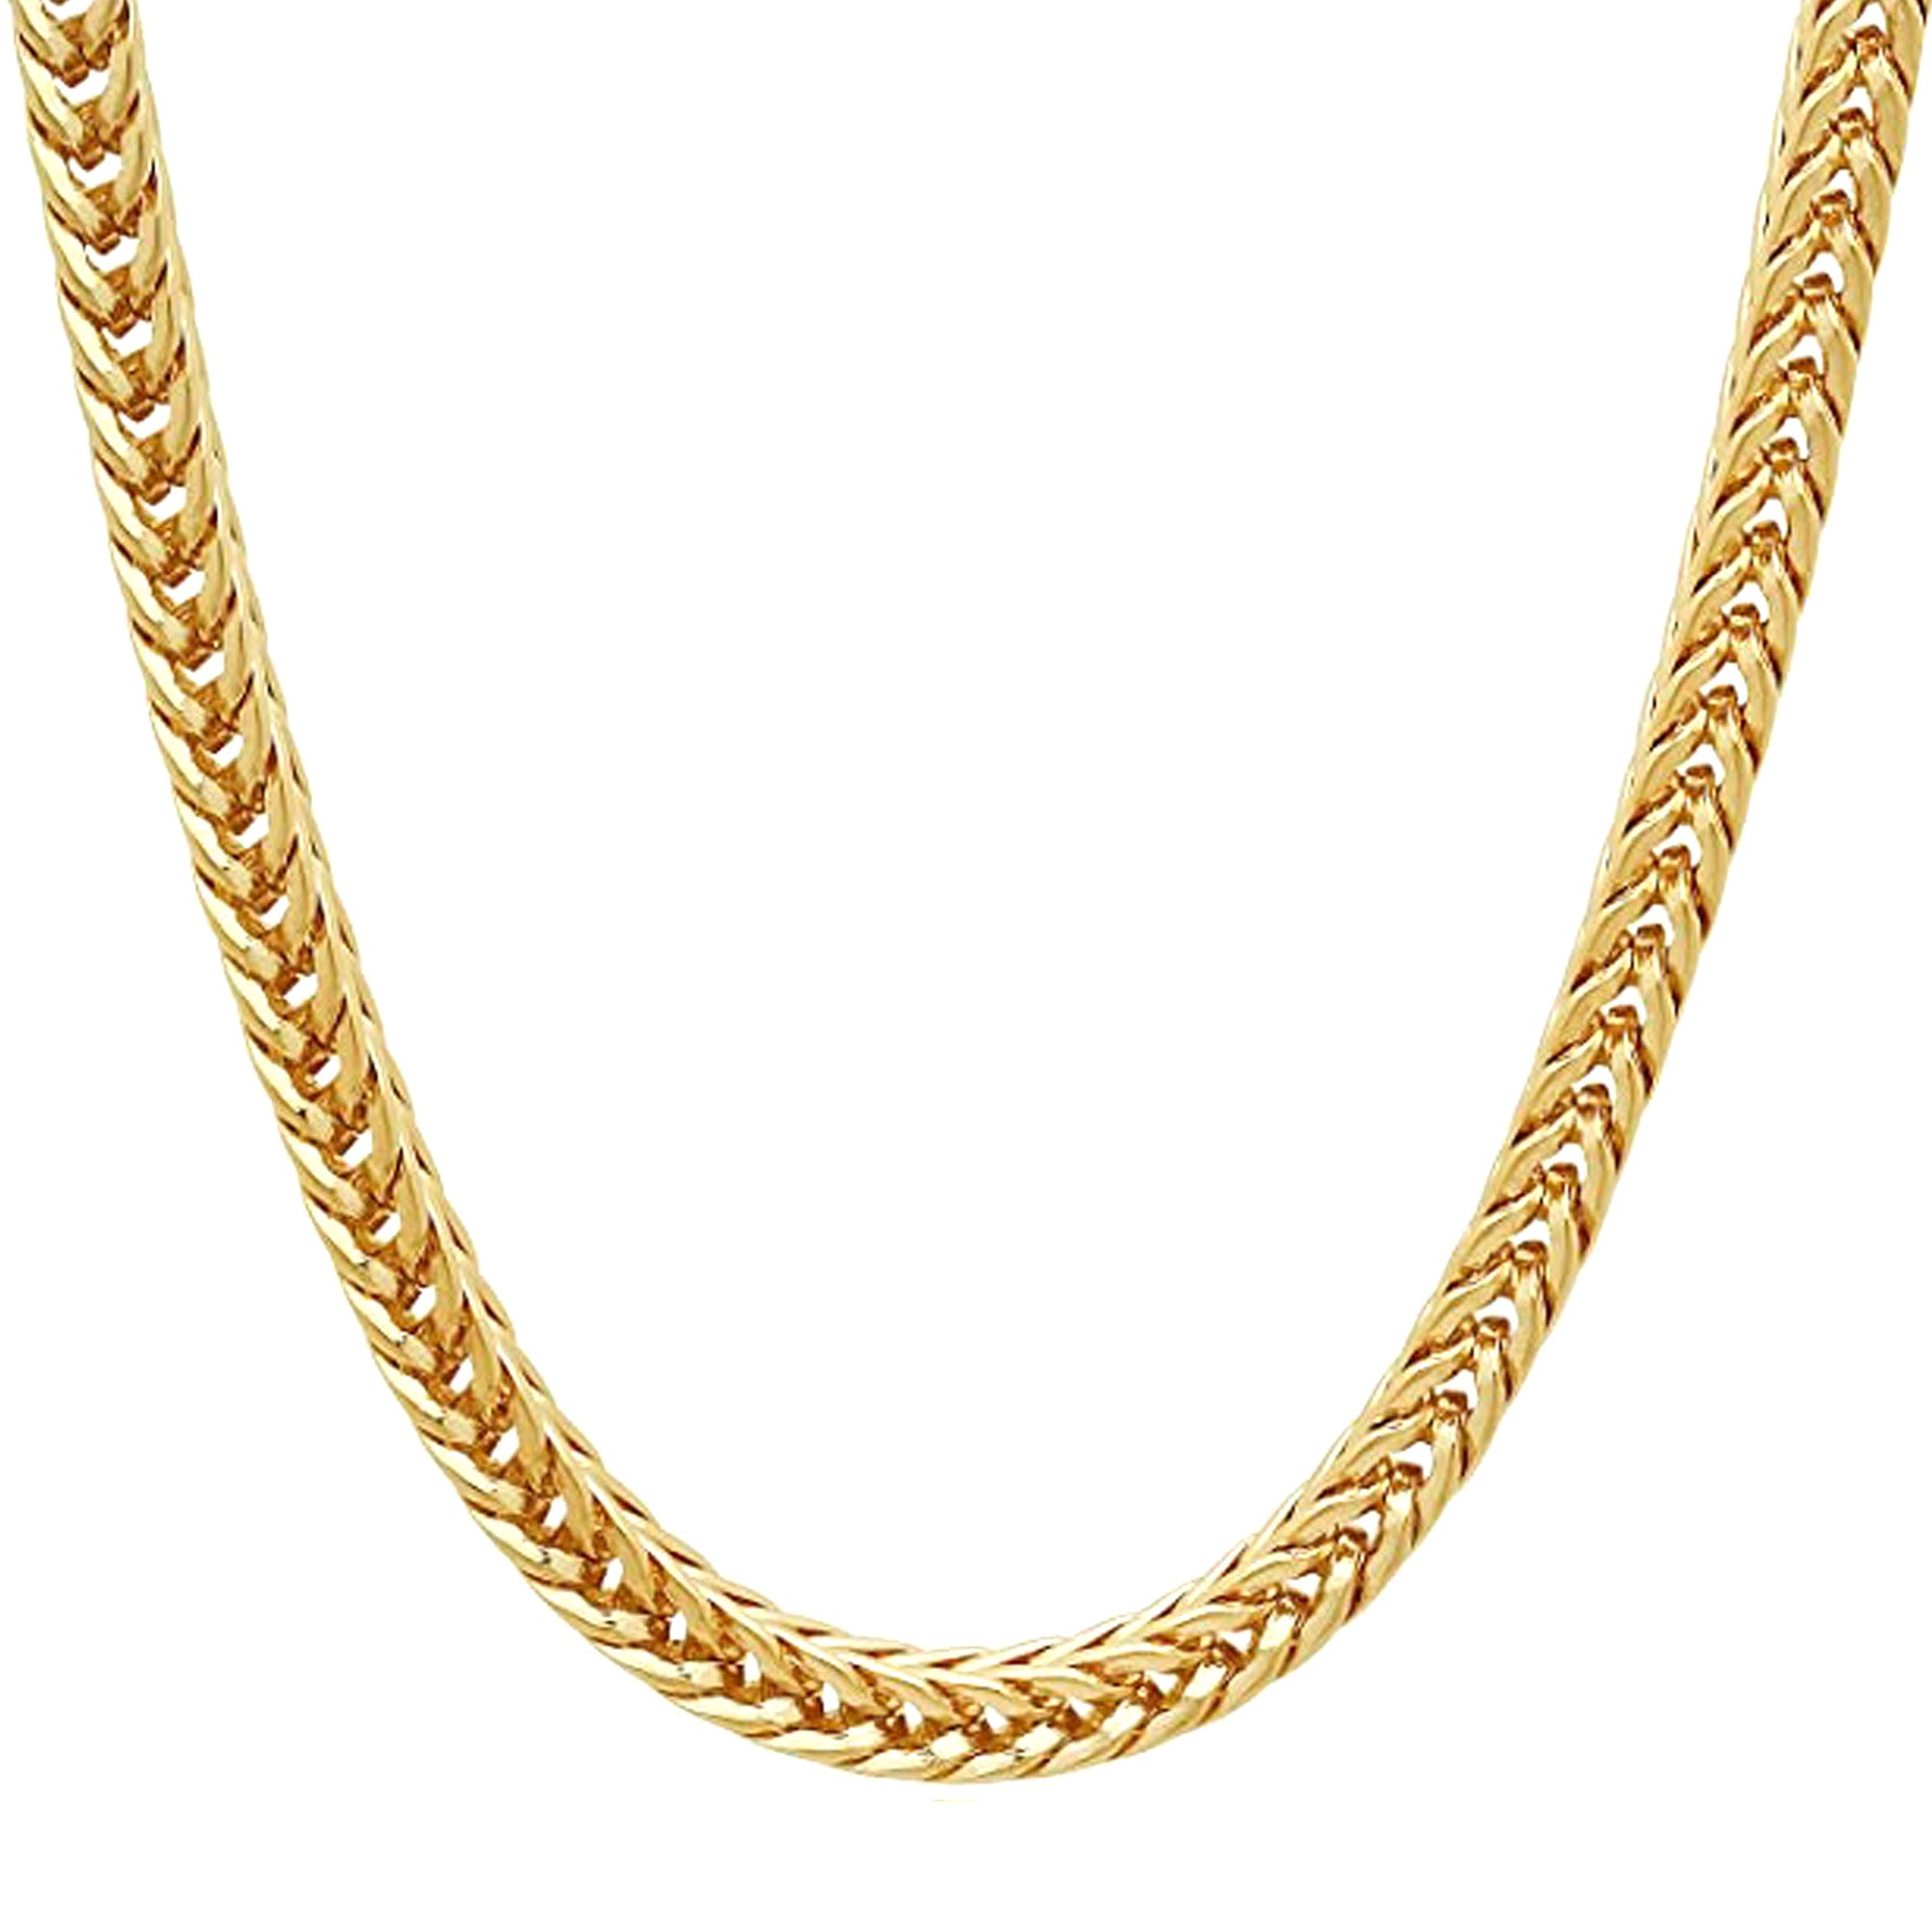 14K Yellow Gold Filled Round Franco Chain Necklace, 6.0mm Wide fine designer jewelry for men and women